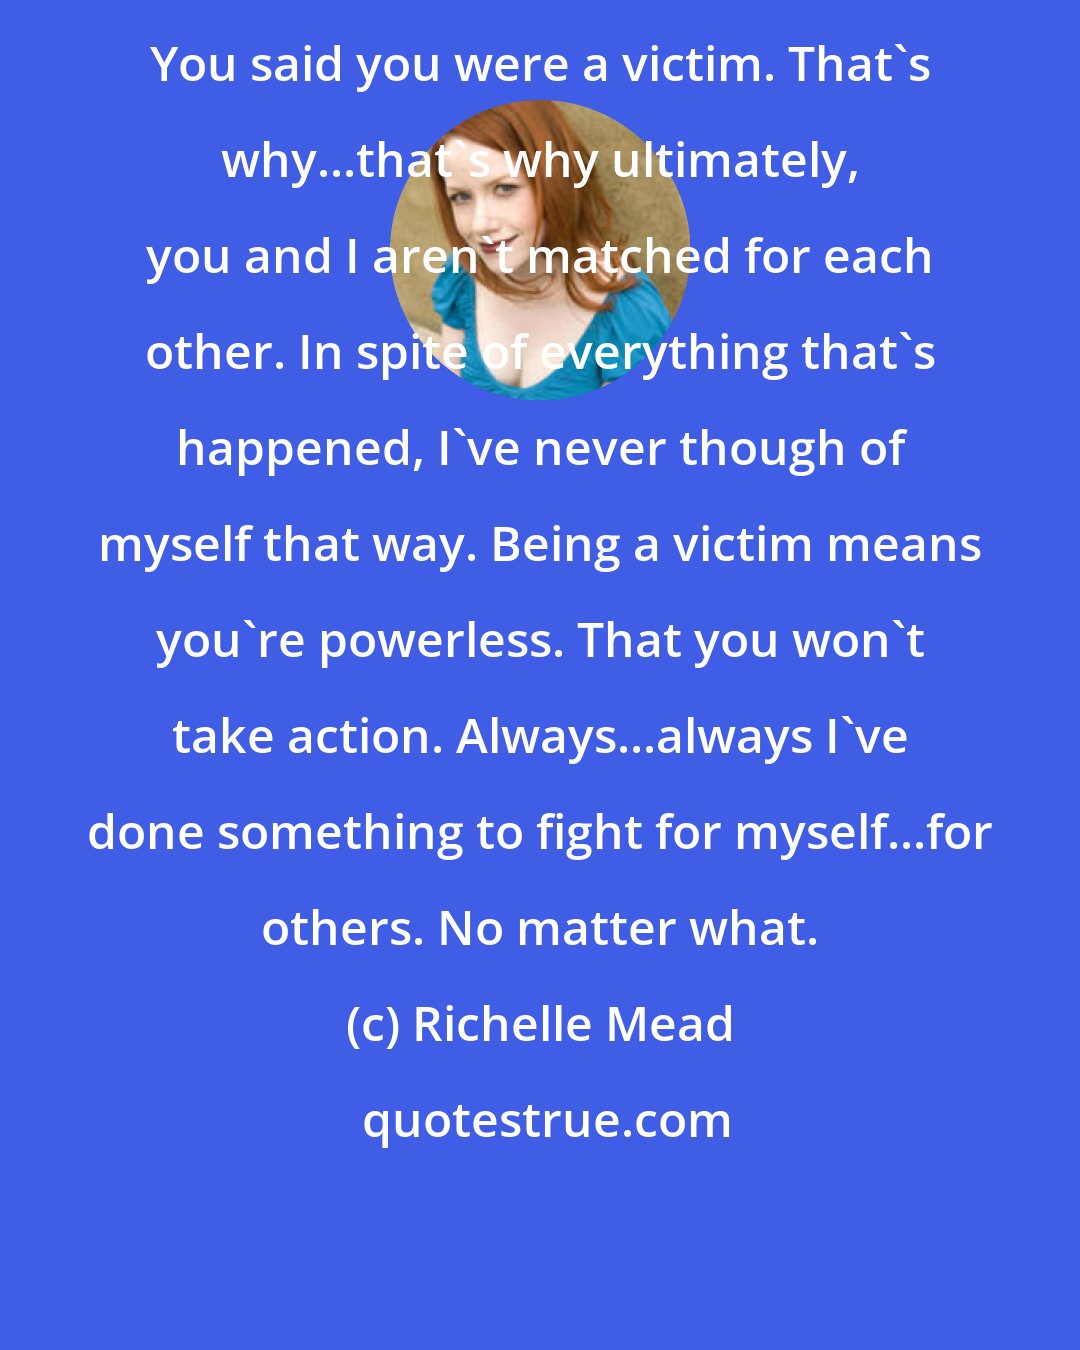 Richelle Mead: You said you were a victim. That's why...that's why ultimately, you and I aren't matched for each other. In spite of everything that's happened, I've never though of myself that way. Being a victim means you're powerless. That you won't take action. Always...always I've done something to fight for myself...for others. No matter what.